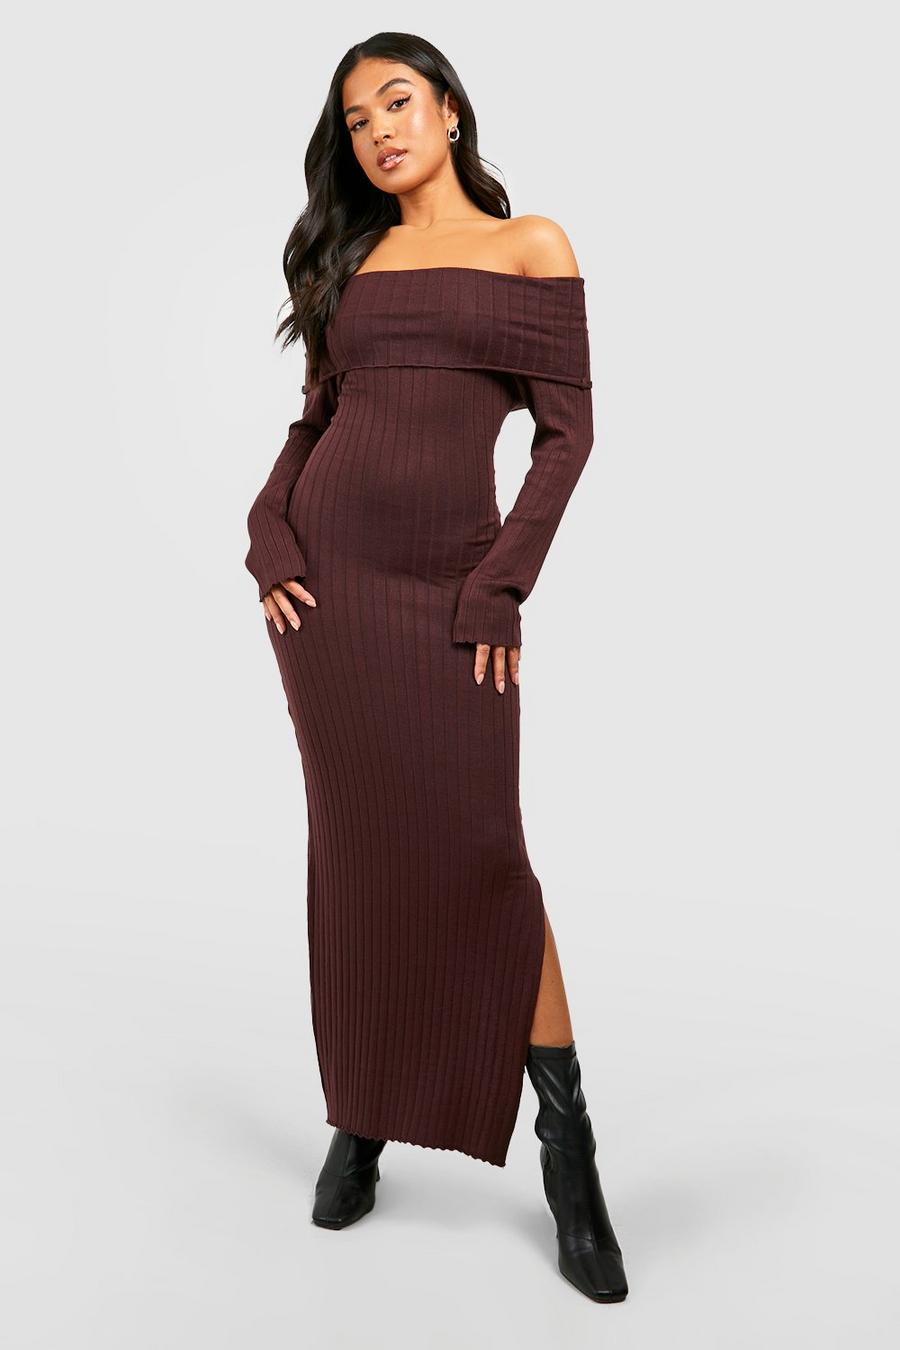 Chocolate Petite Oversized Off The Shoulder Neckline Knitted Maxi Dress